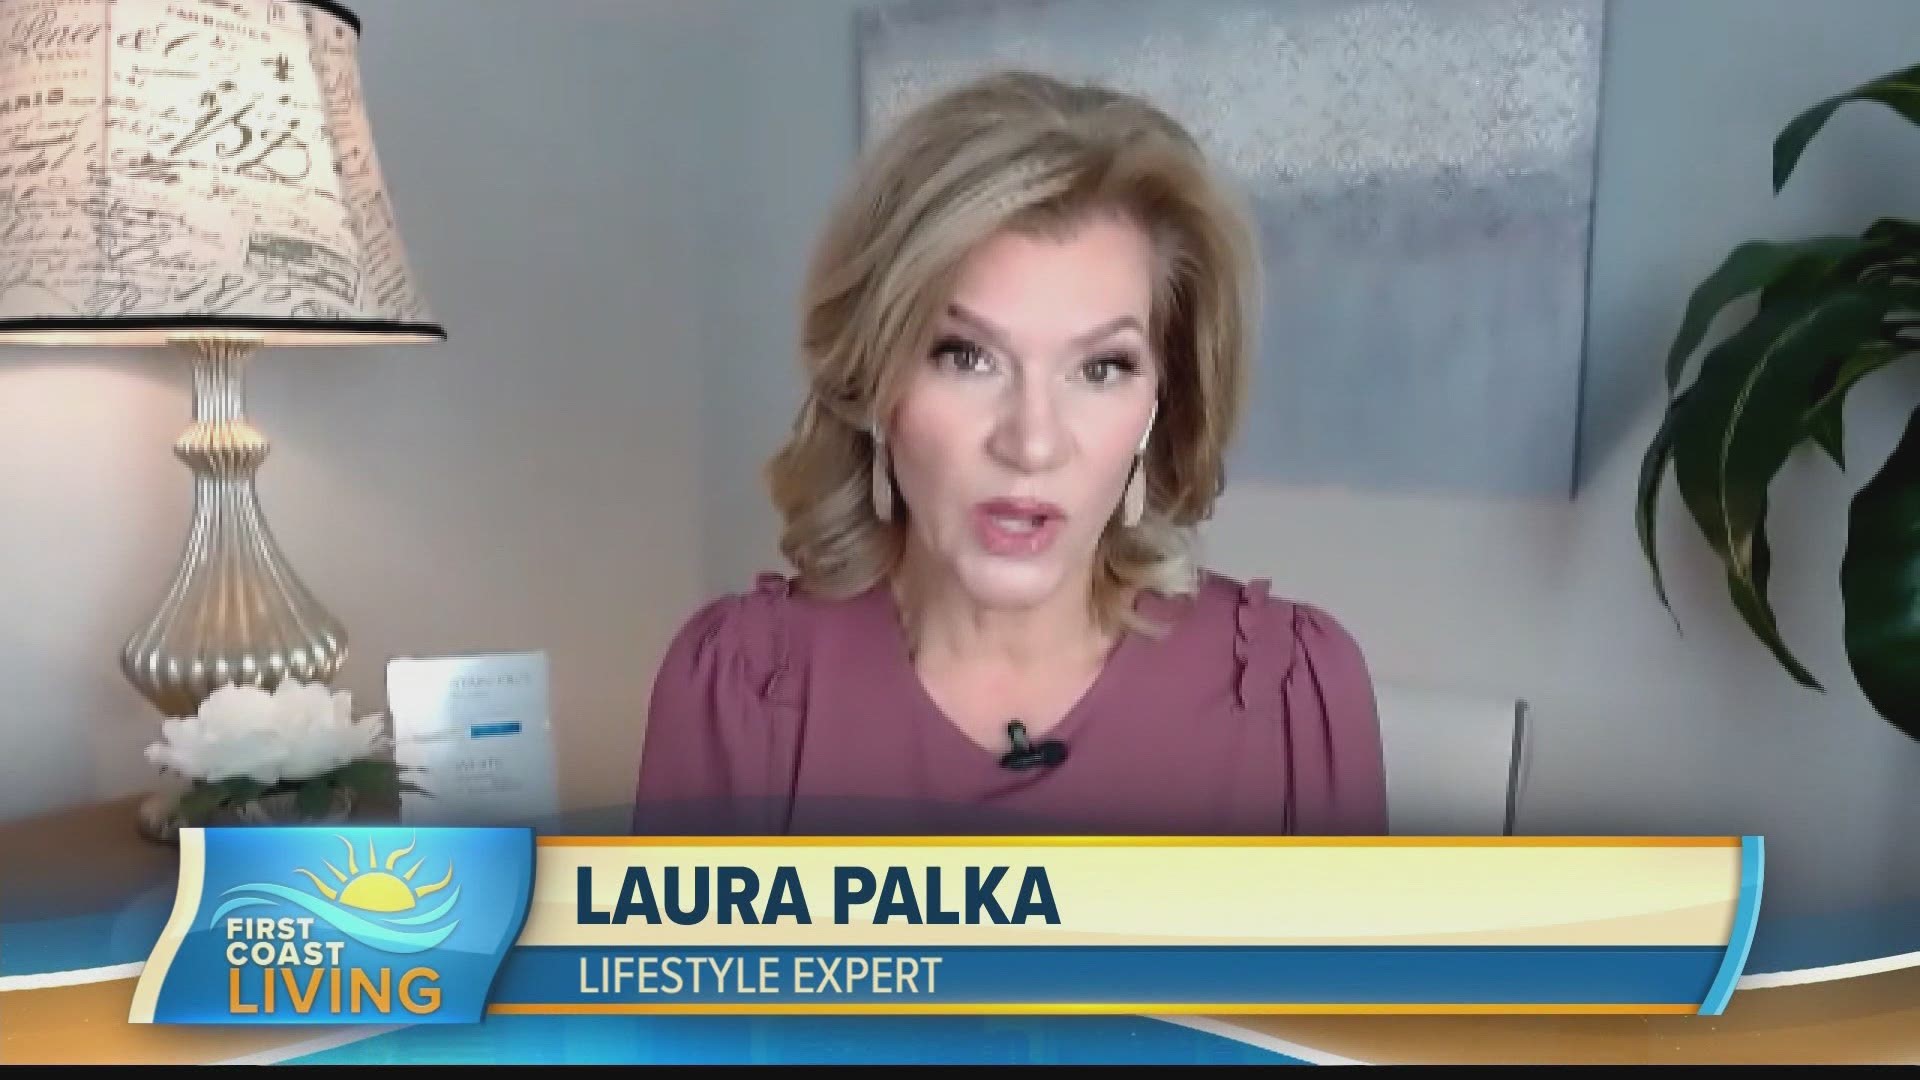 Lifestyle expert, Laura Palka explains how whitening your teeth can make you look younger!